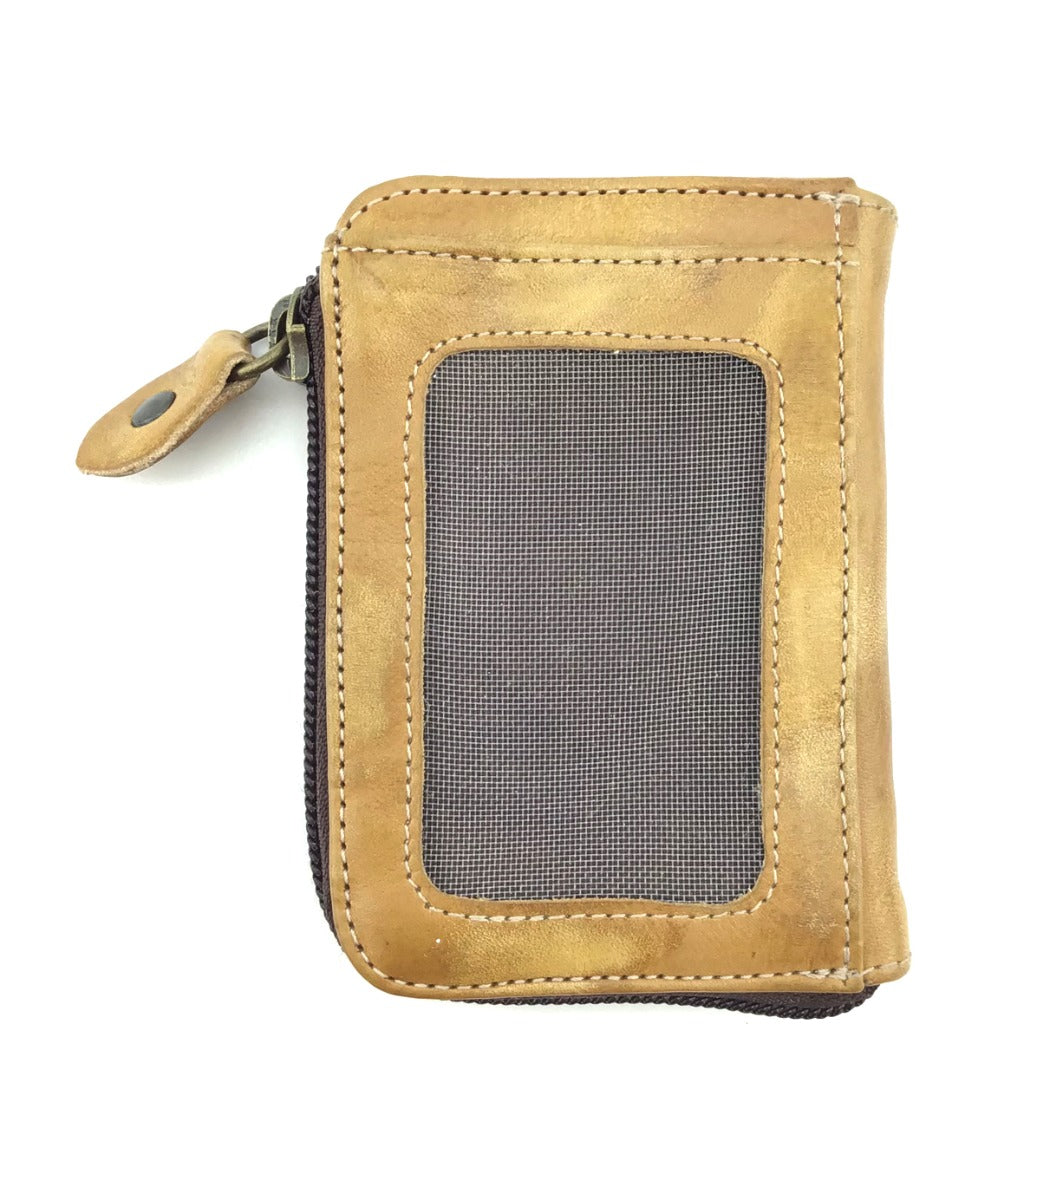 A Carrie leather wallet with a zipper by Bed Stu.